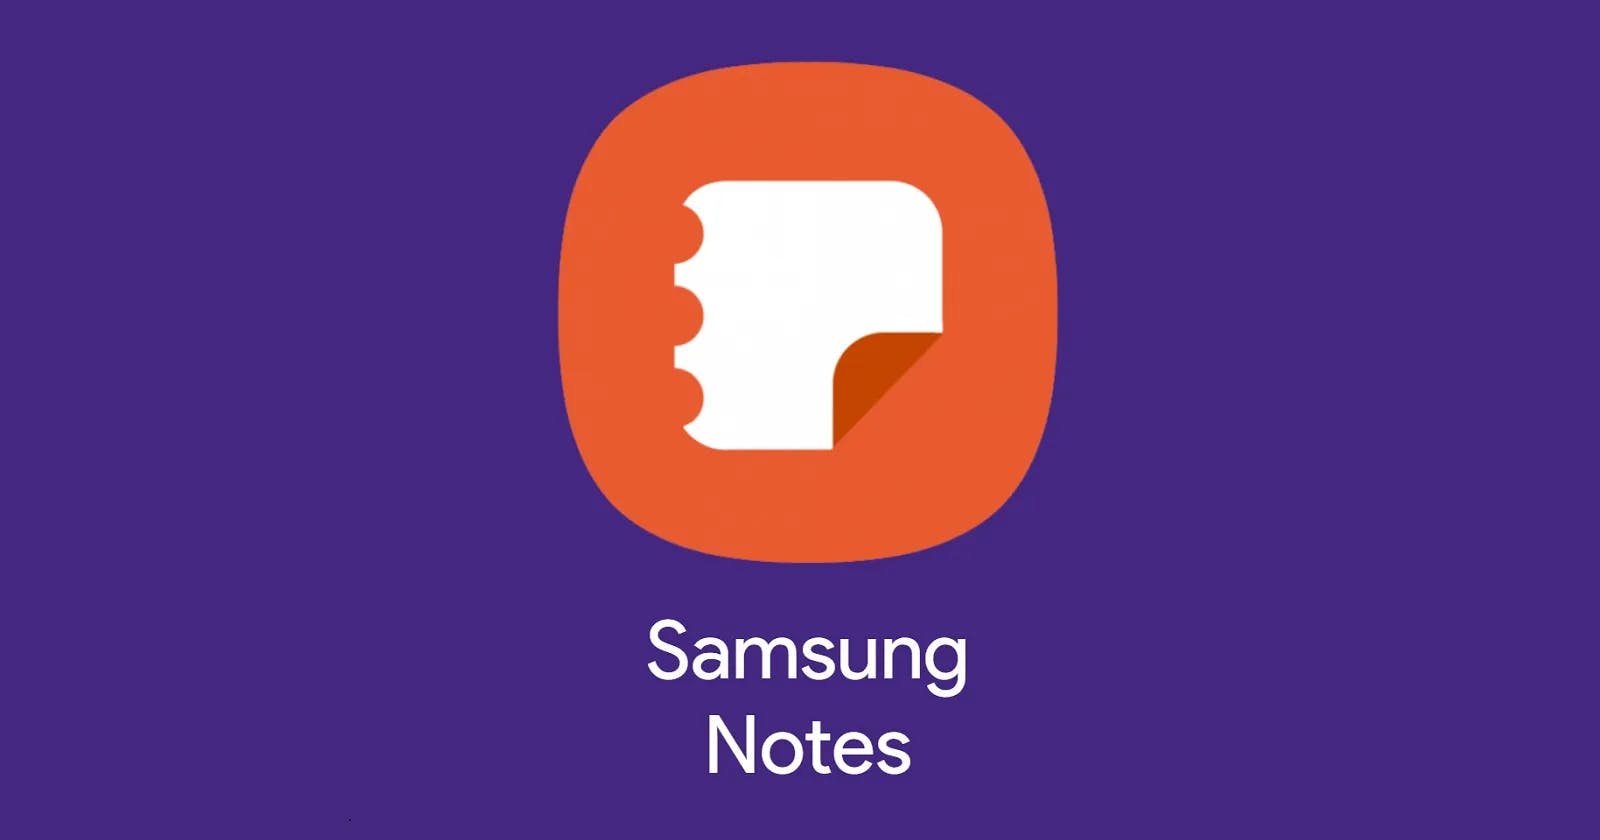 How to get the Samsung Notes app on any Windows PC